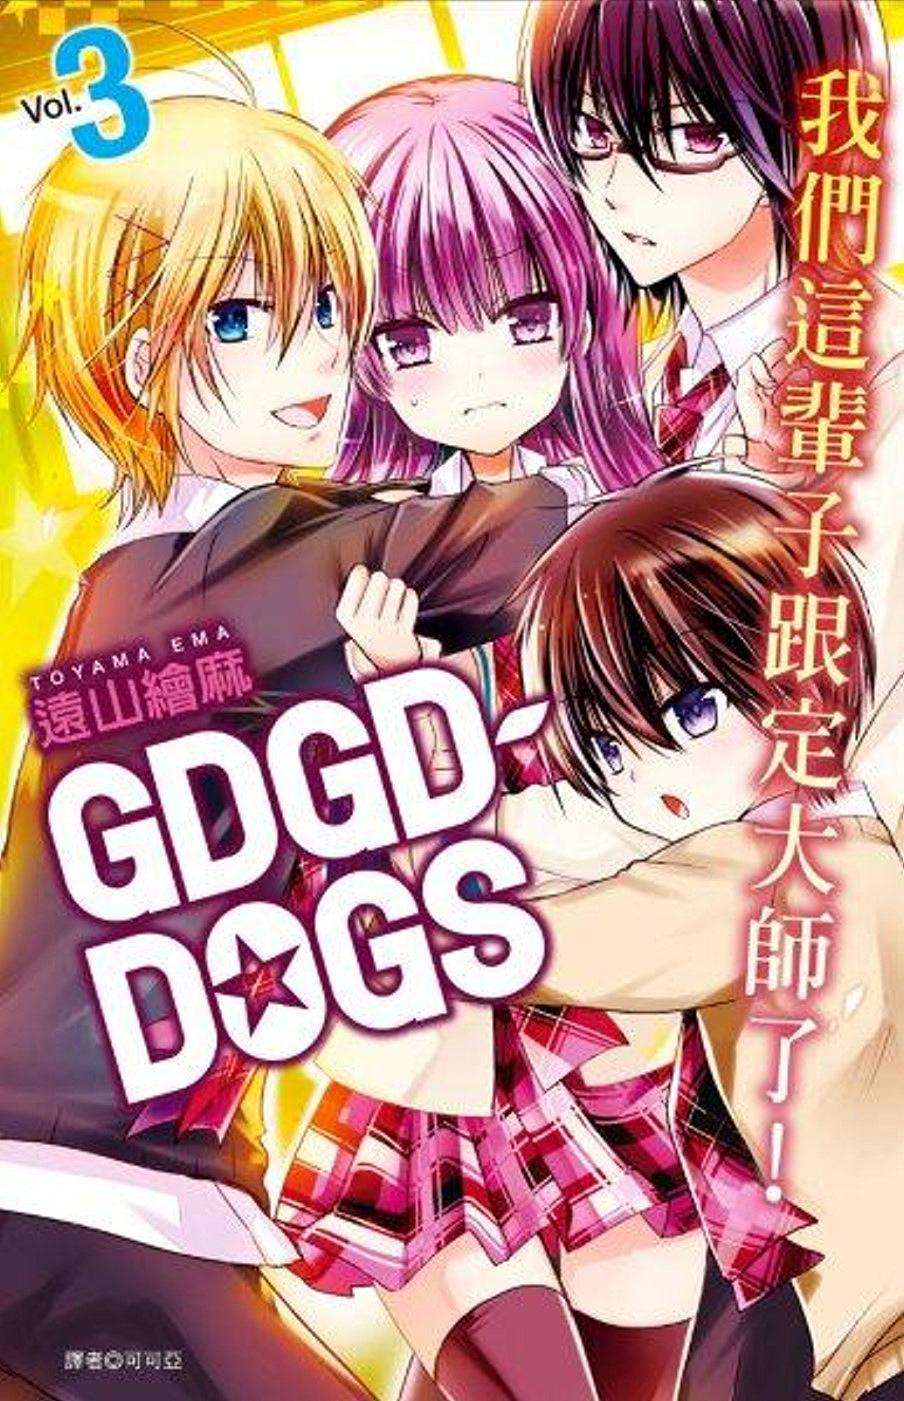 GDGD-DOGS(03)完